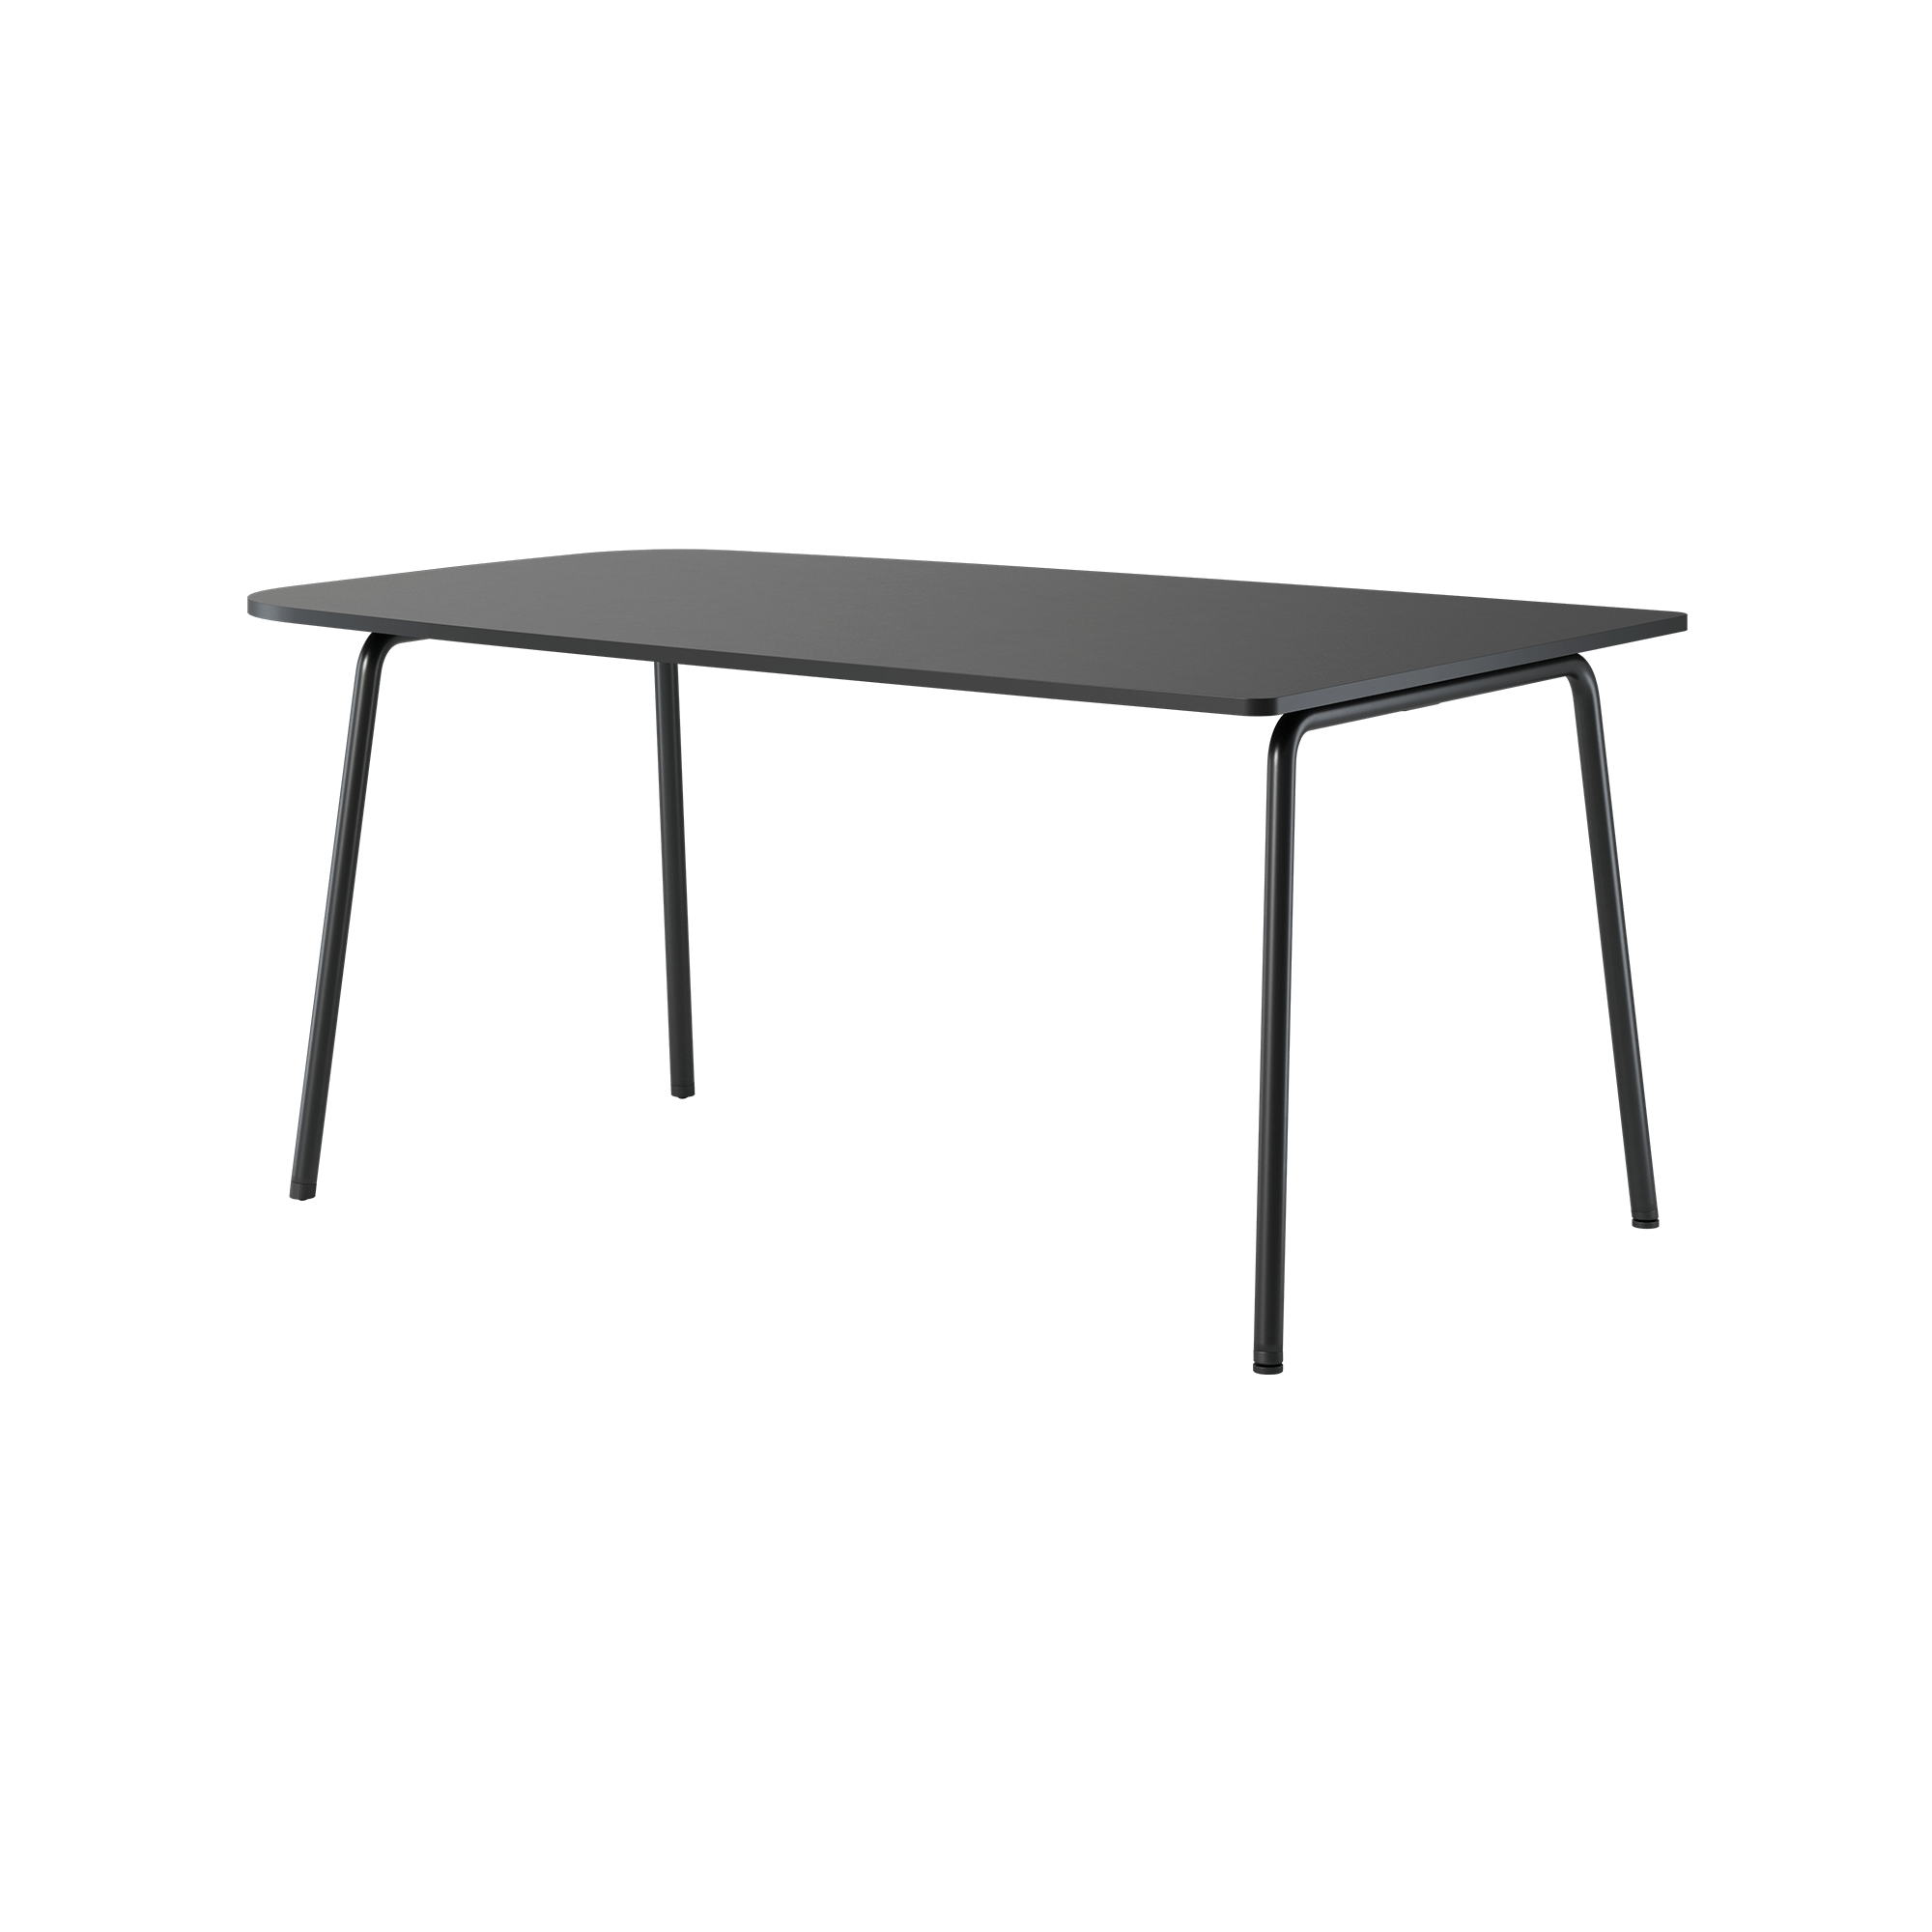 A black dining table with black legs.